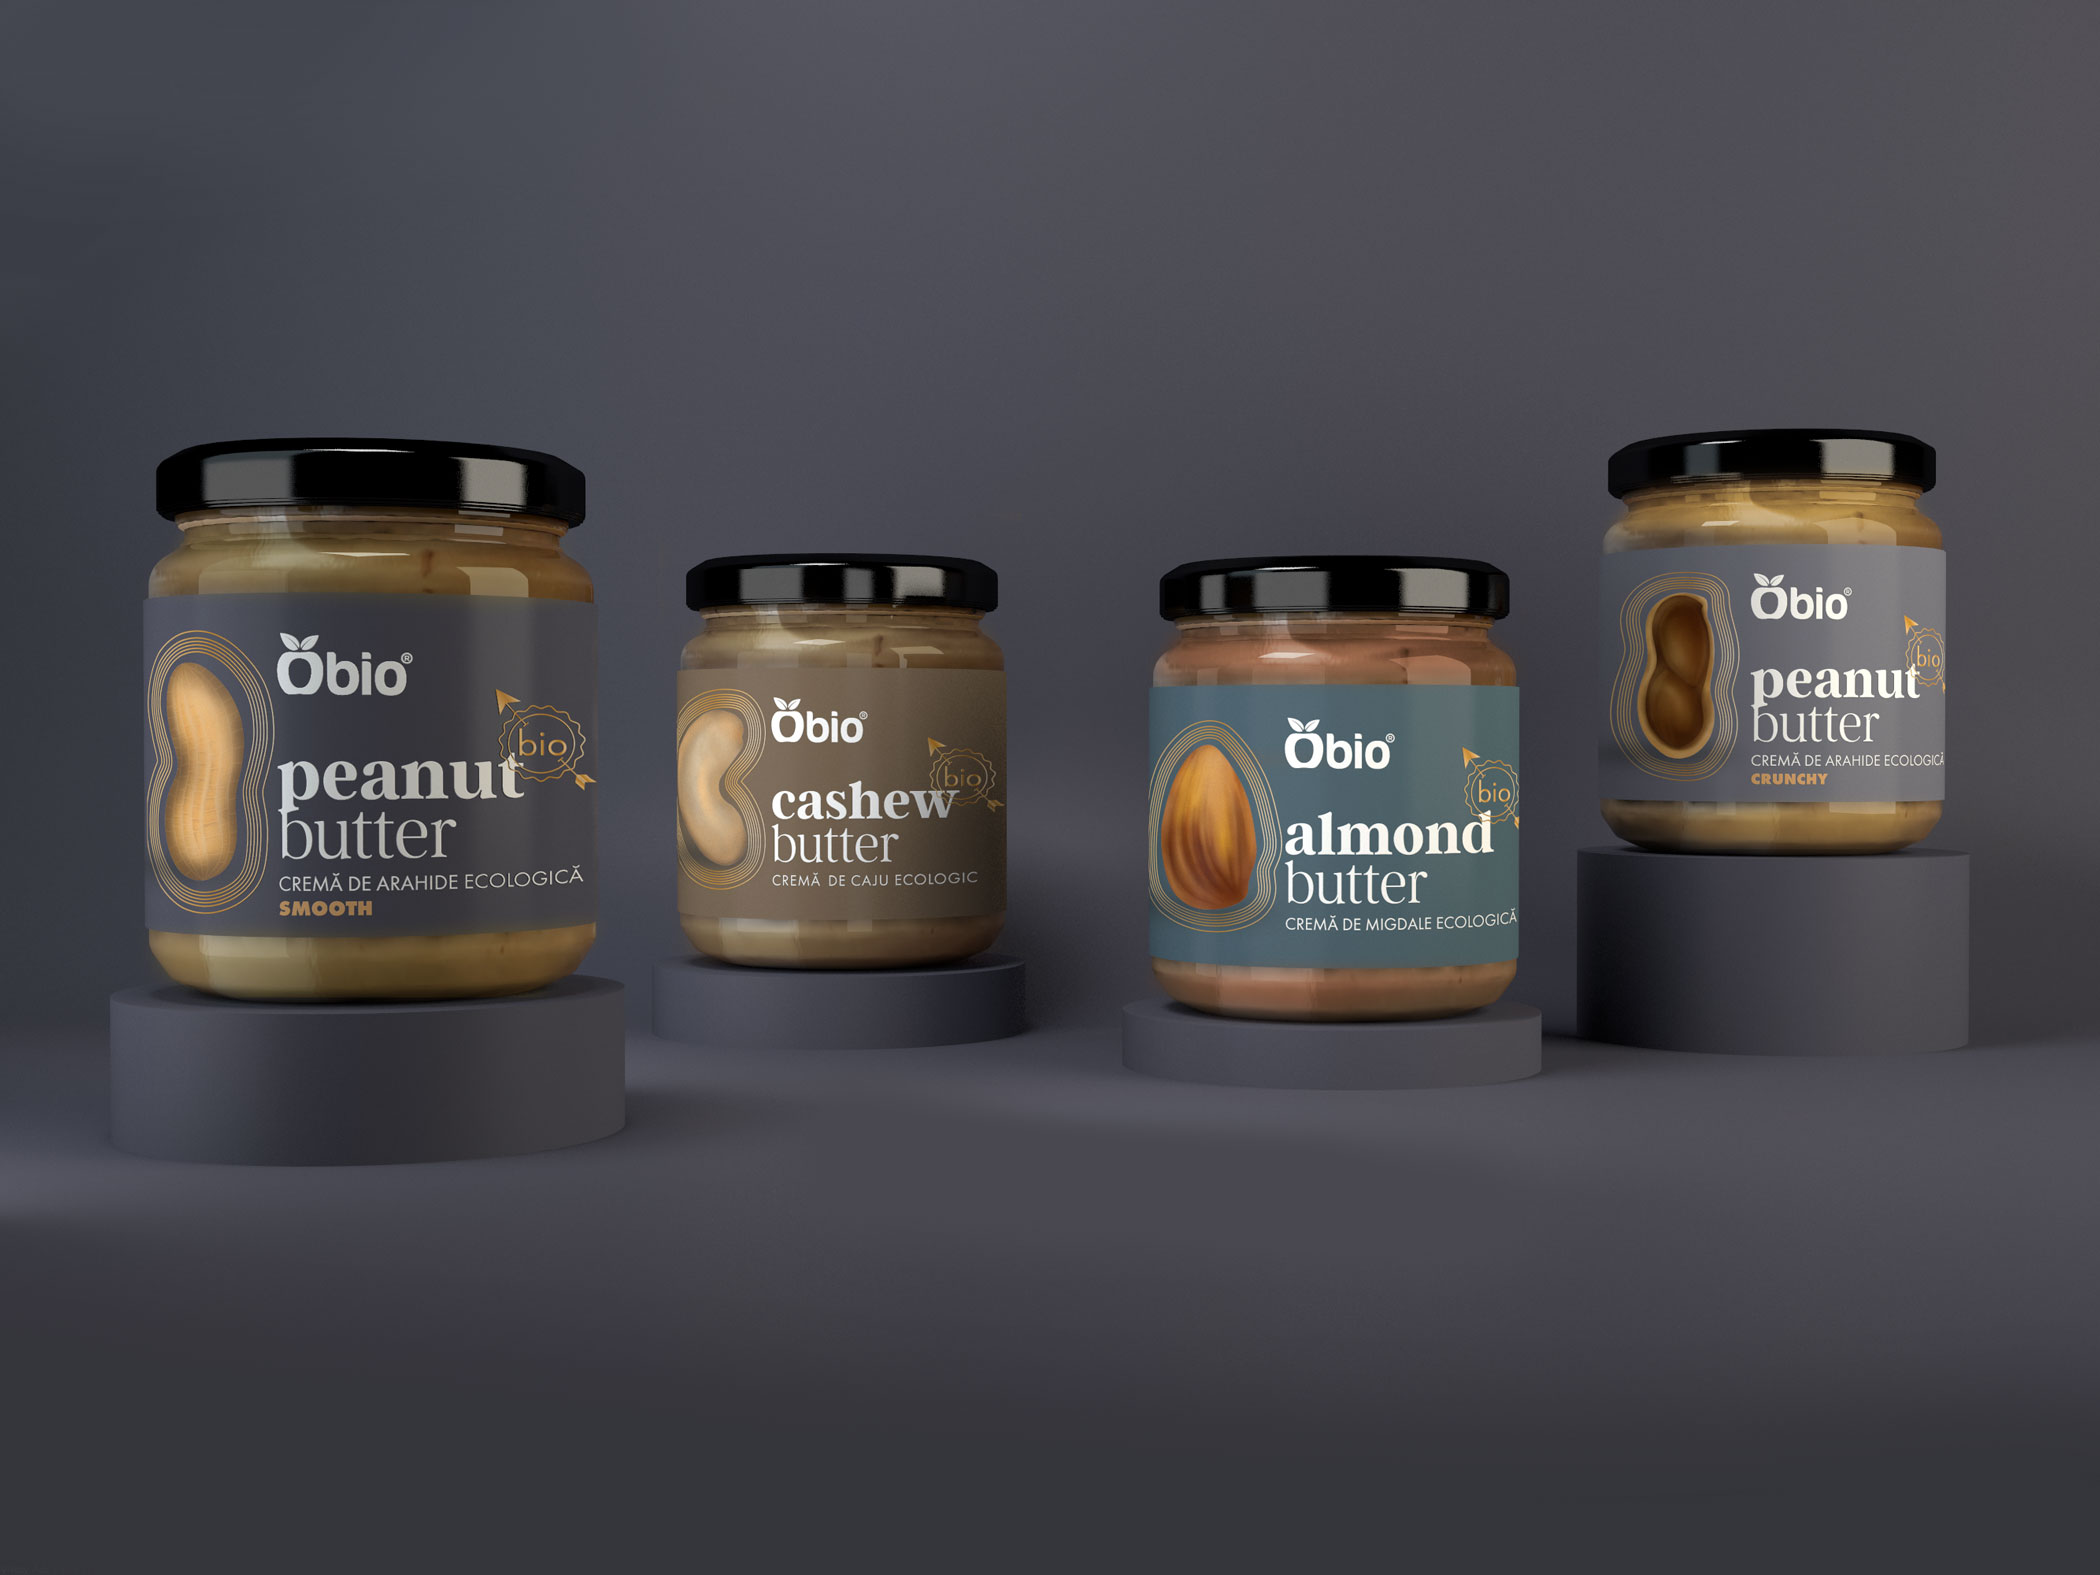 Redesigning Obio Nut Butter in a Darker, Premium and Modern Style